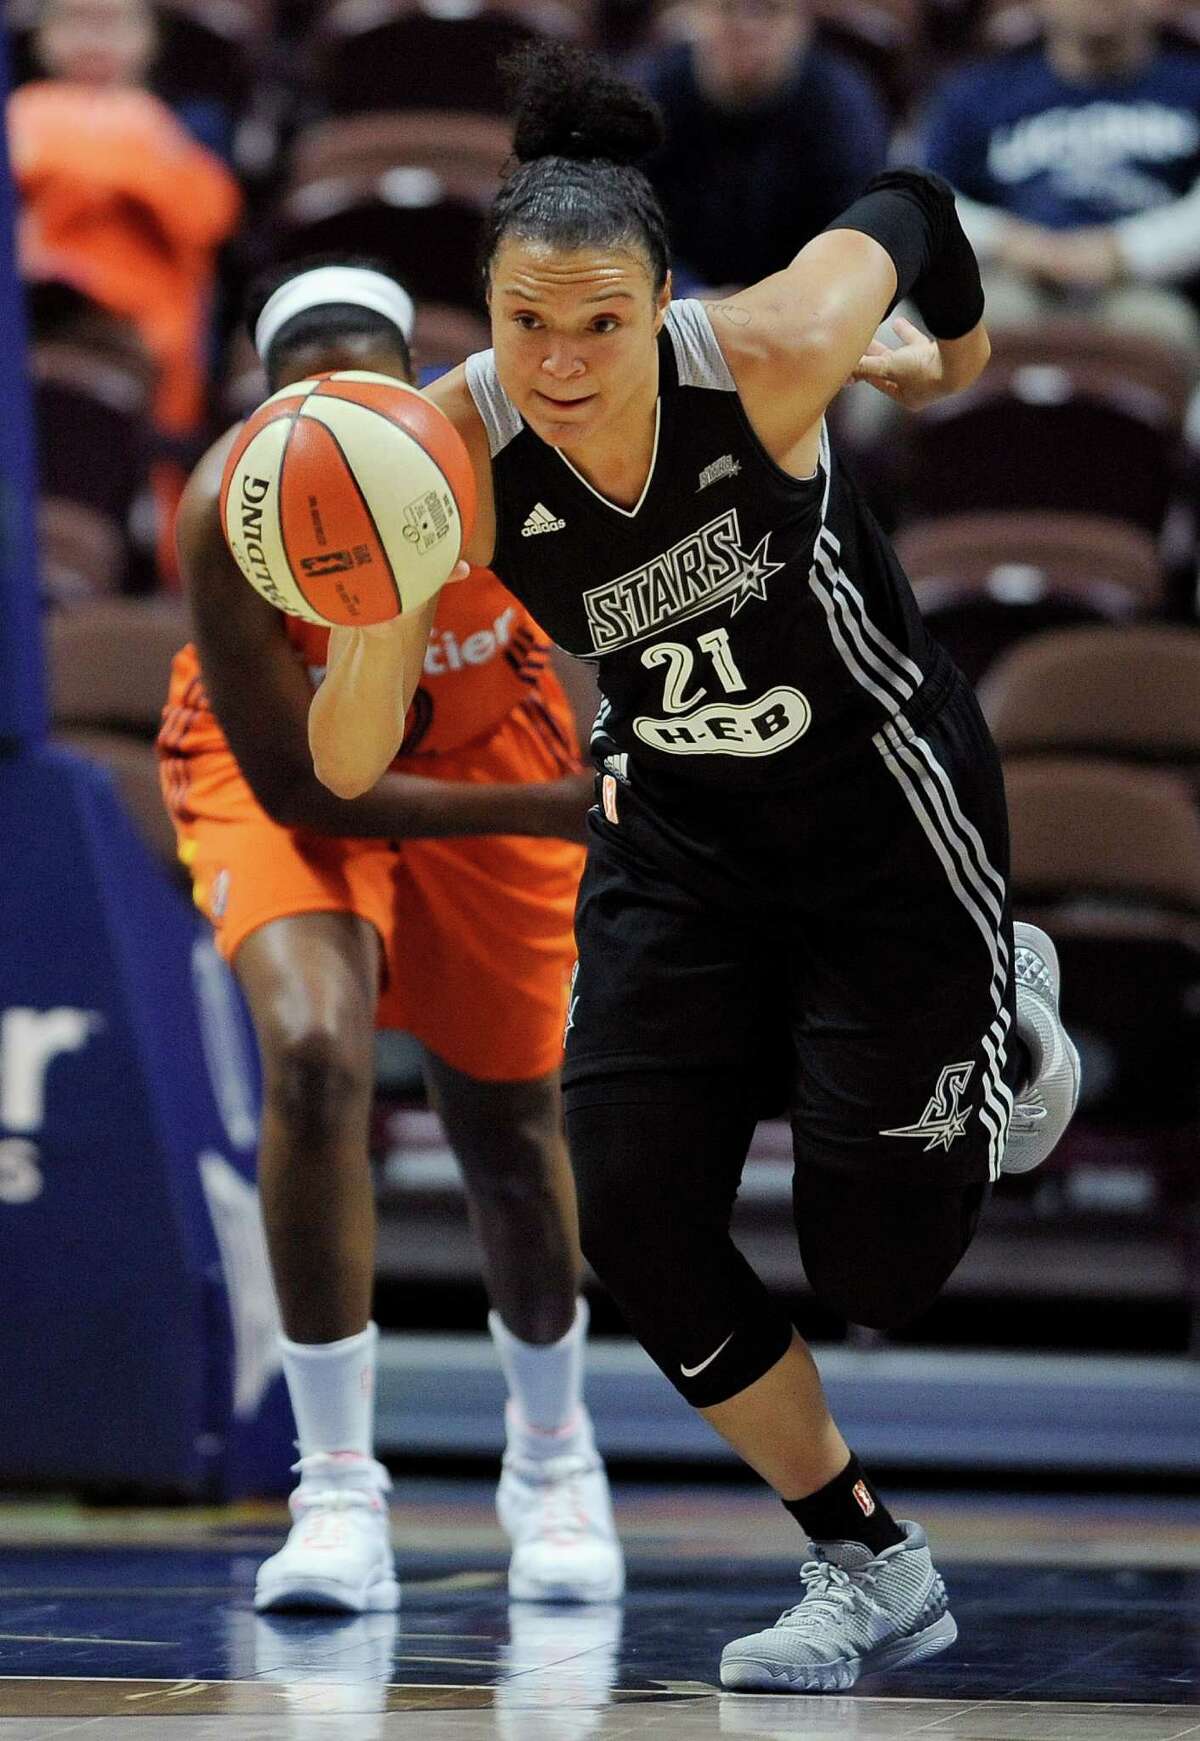 Stars’ Kayla McBride dribbles up tyhe court during the first half of a WNBA game on June 19, 2016, in Uncasville, Conn.